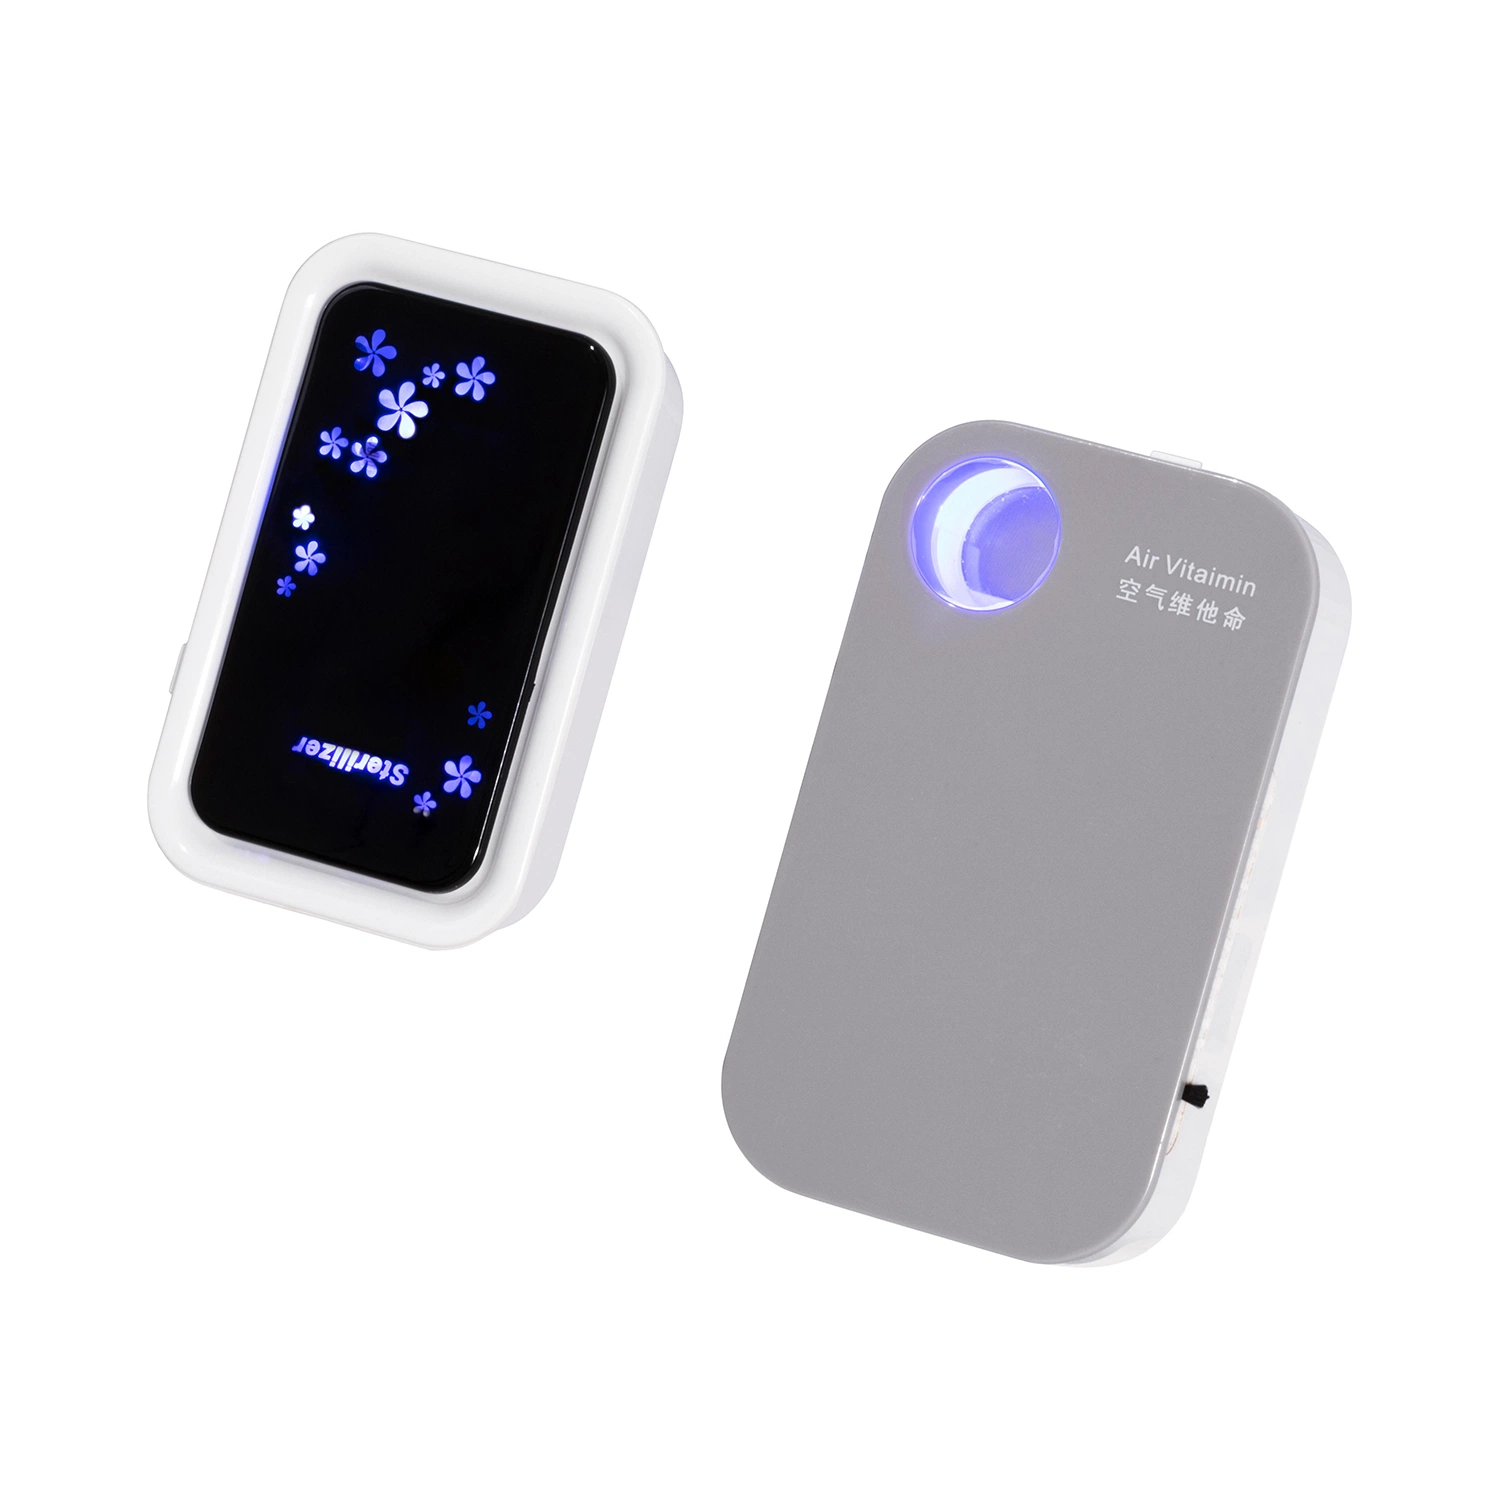 China Manufacturer Mini Air Purifier Home Ionizer for Household